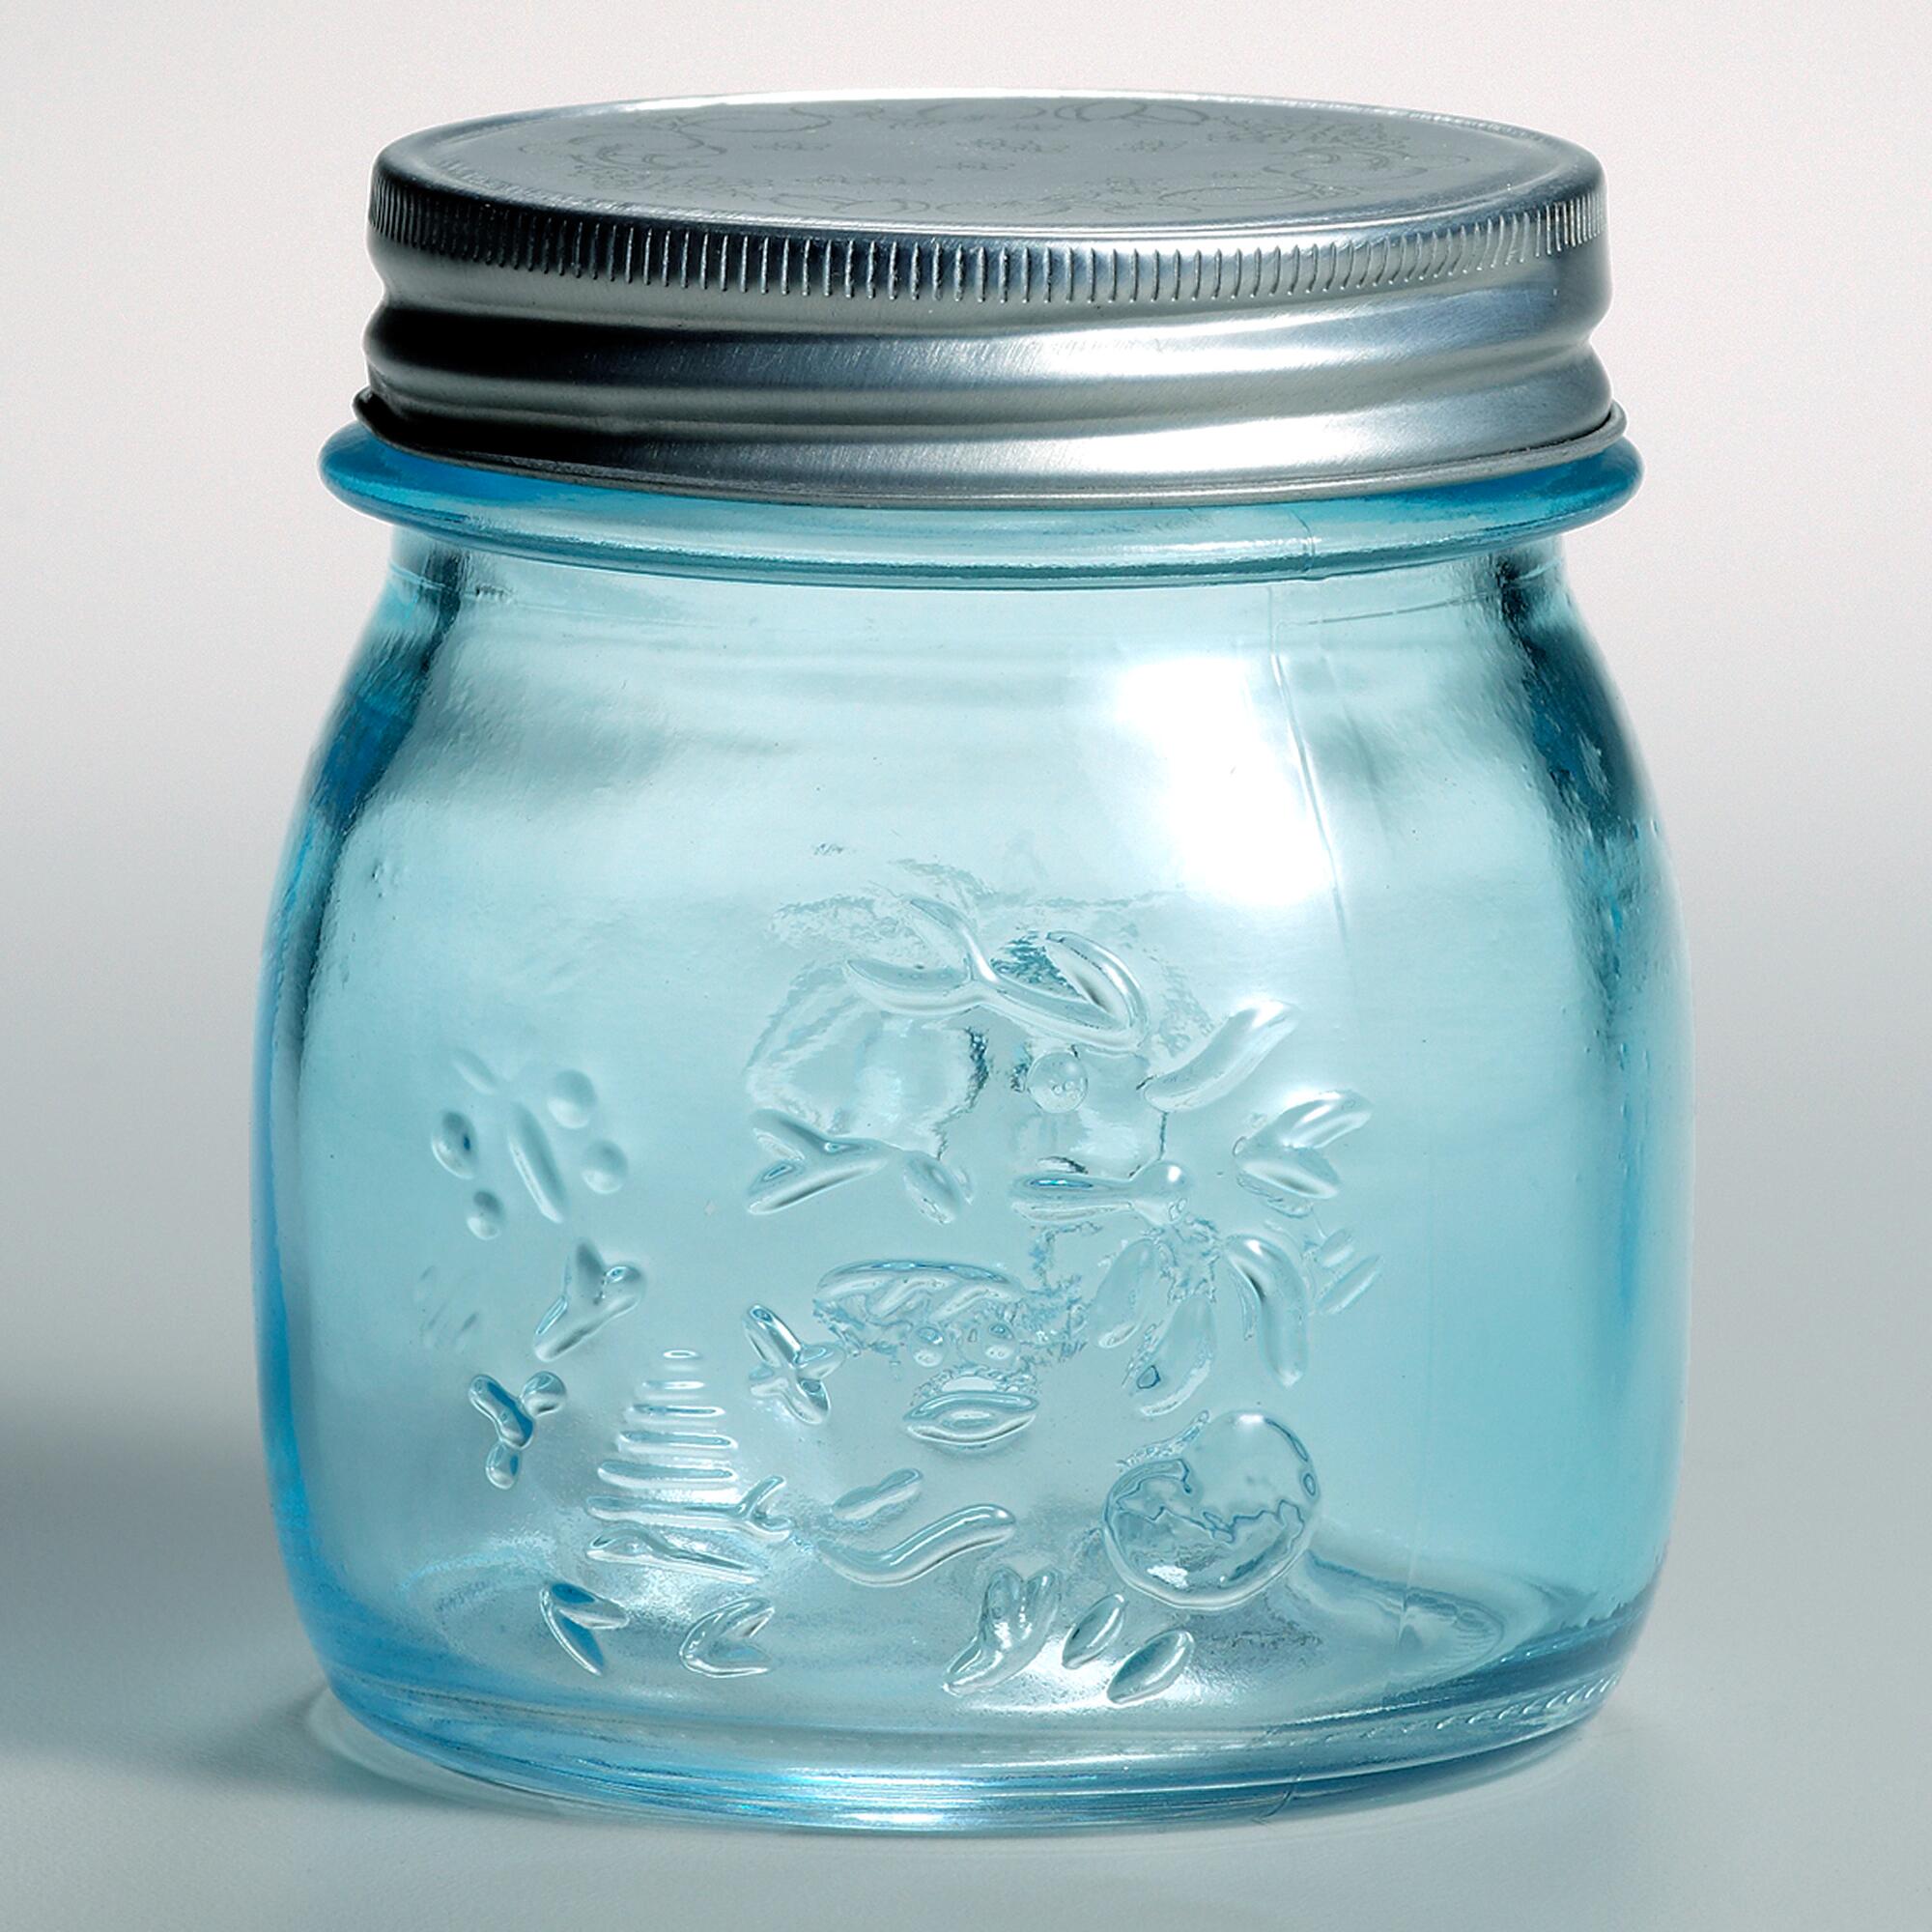 3.5" Blue Jars |Ultimate Gift Guide for Mason Jar Lovers | The Everyday Home